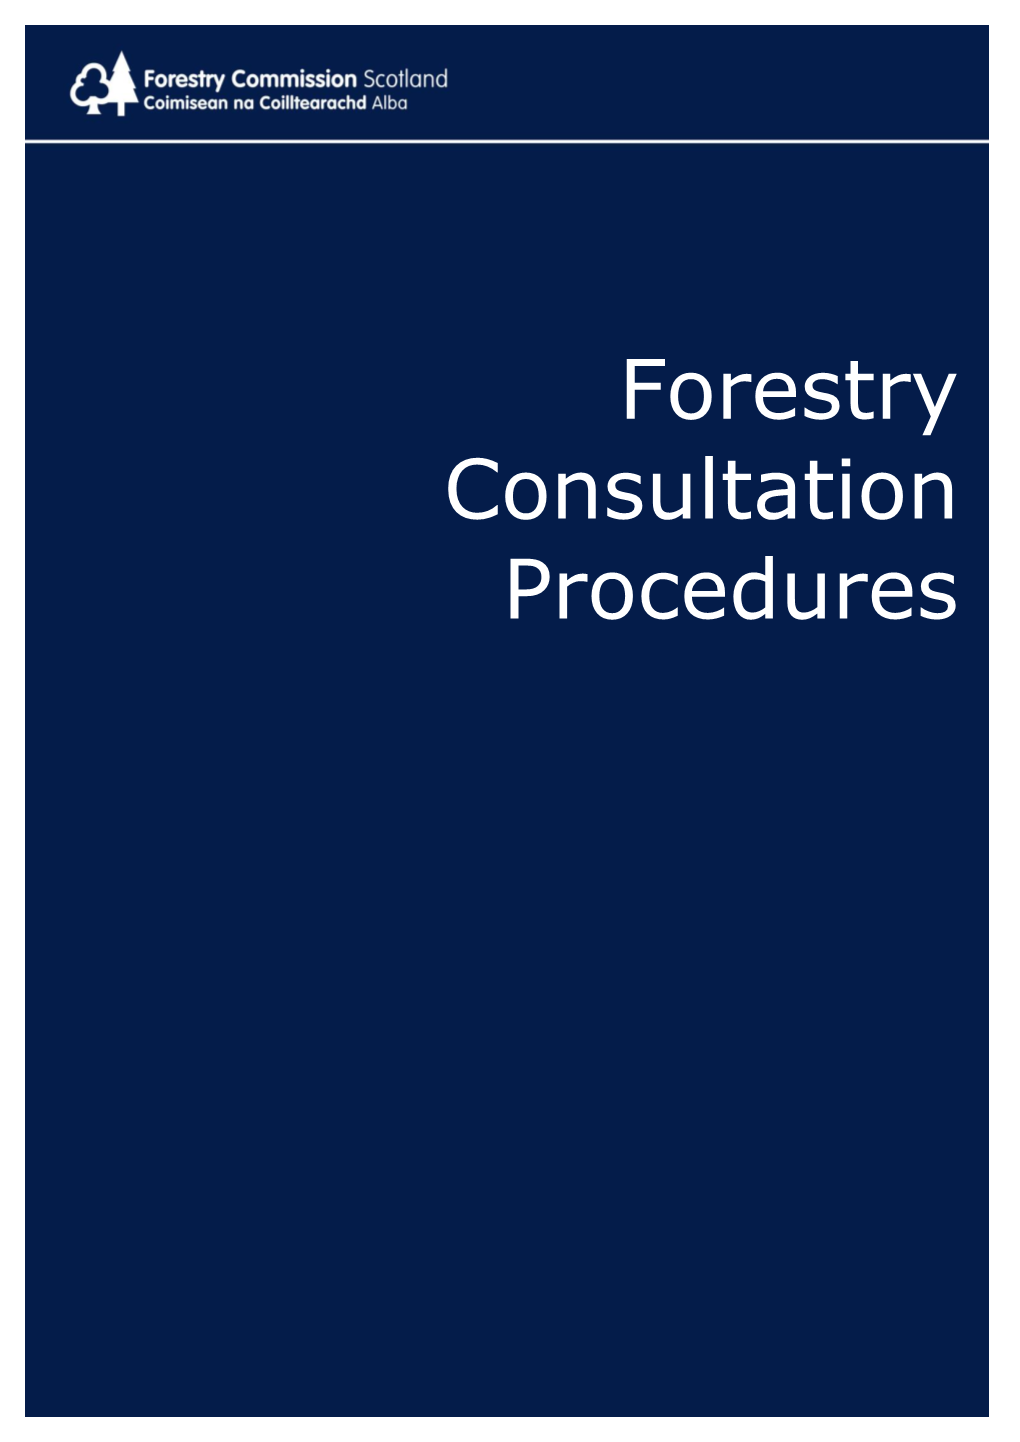 Forestry Consultation Procedures